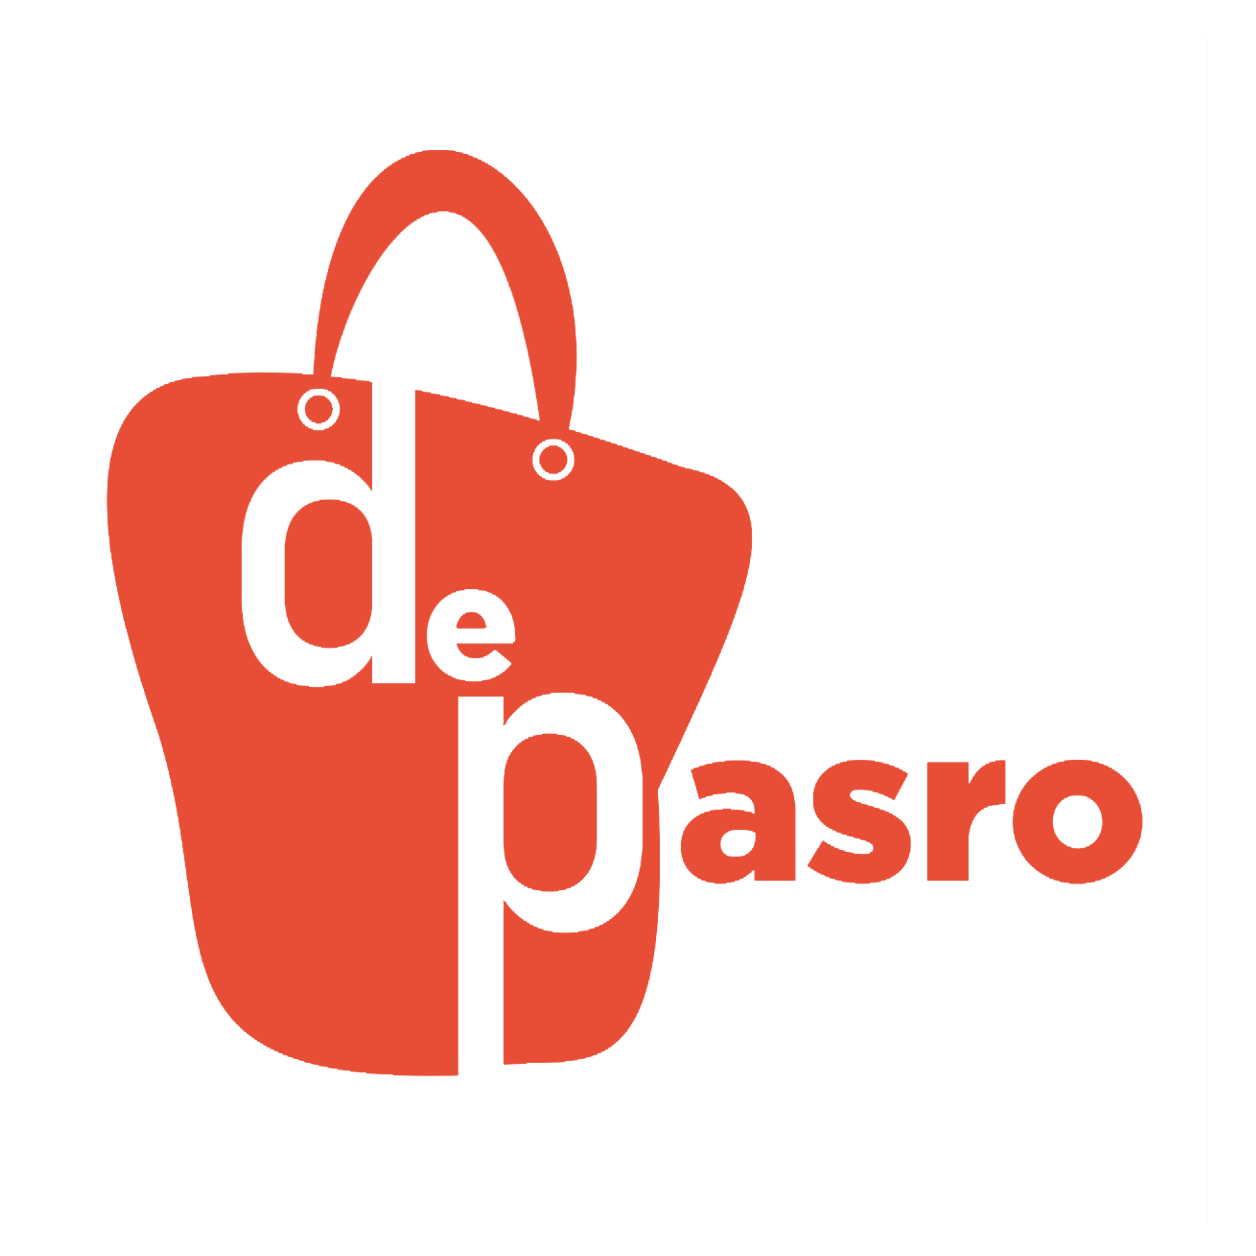 Depasro - Your designs our products.